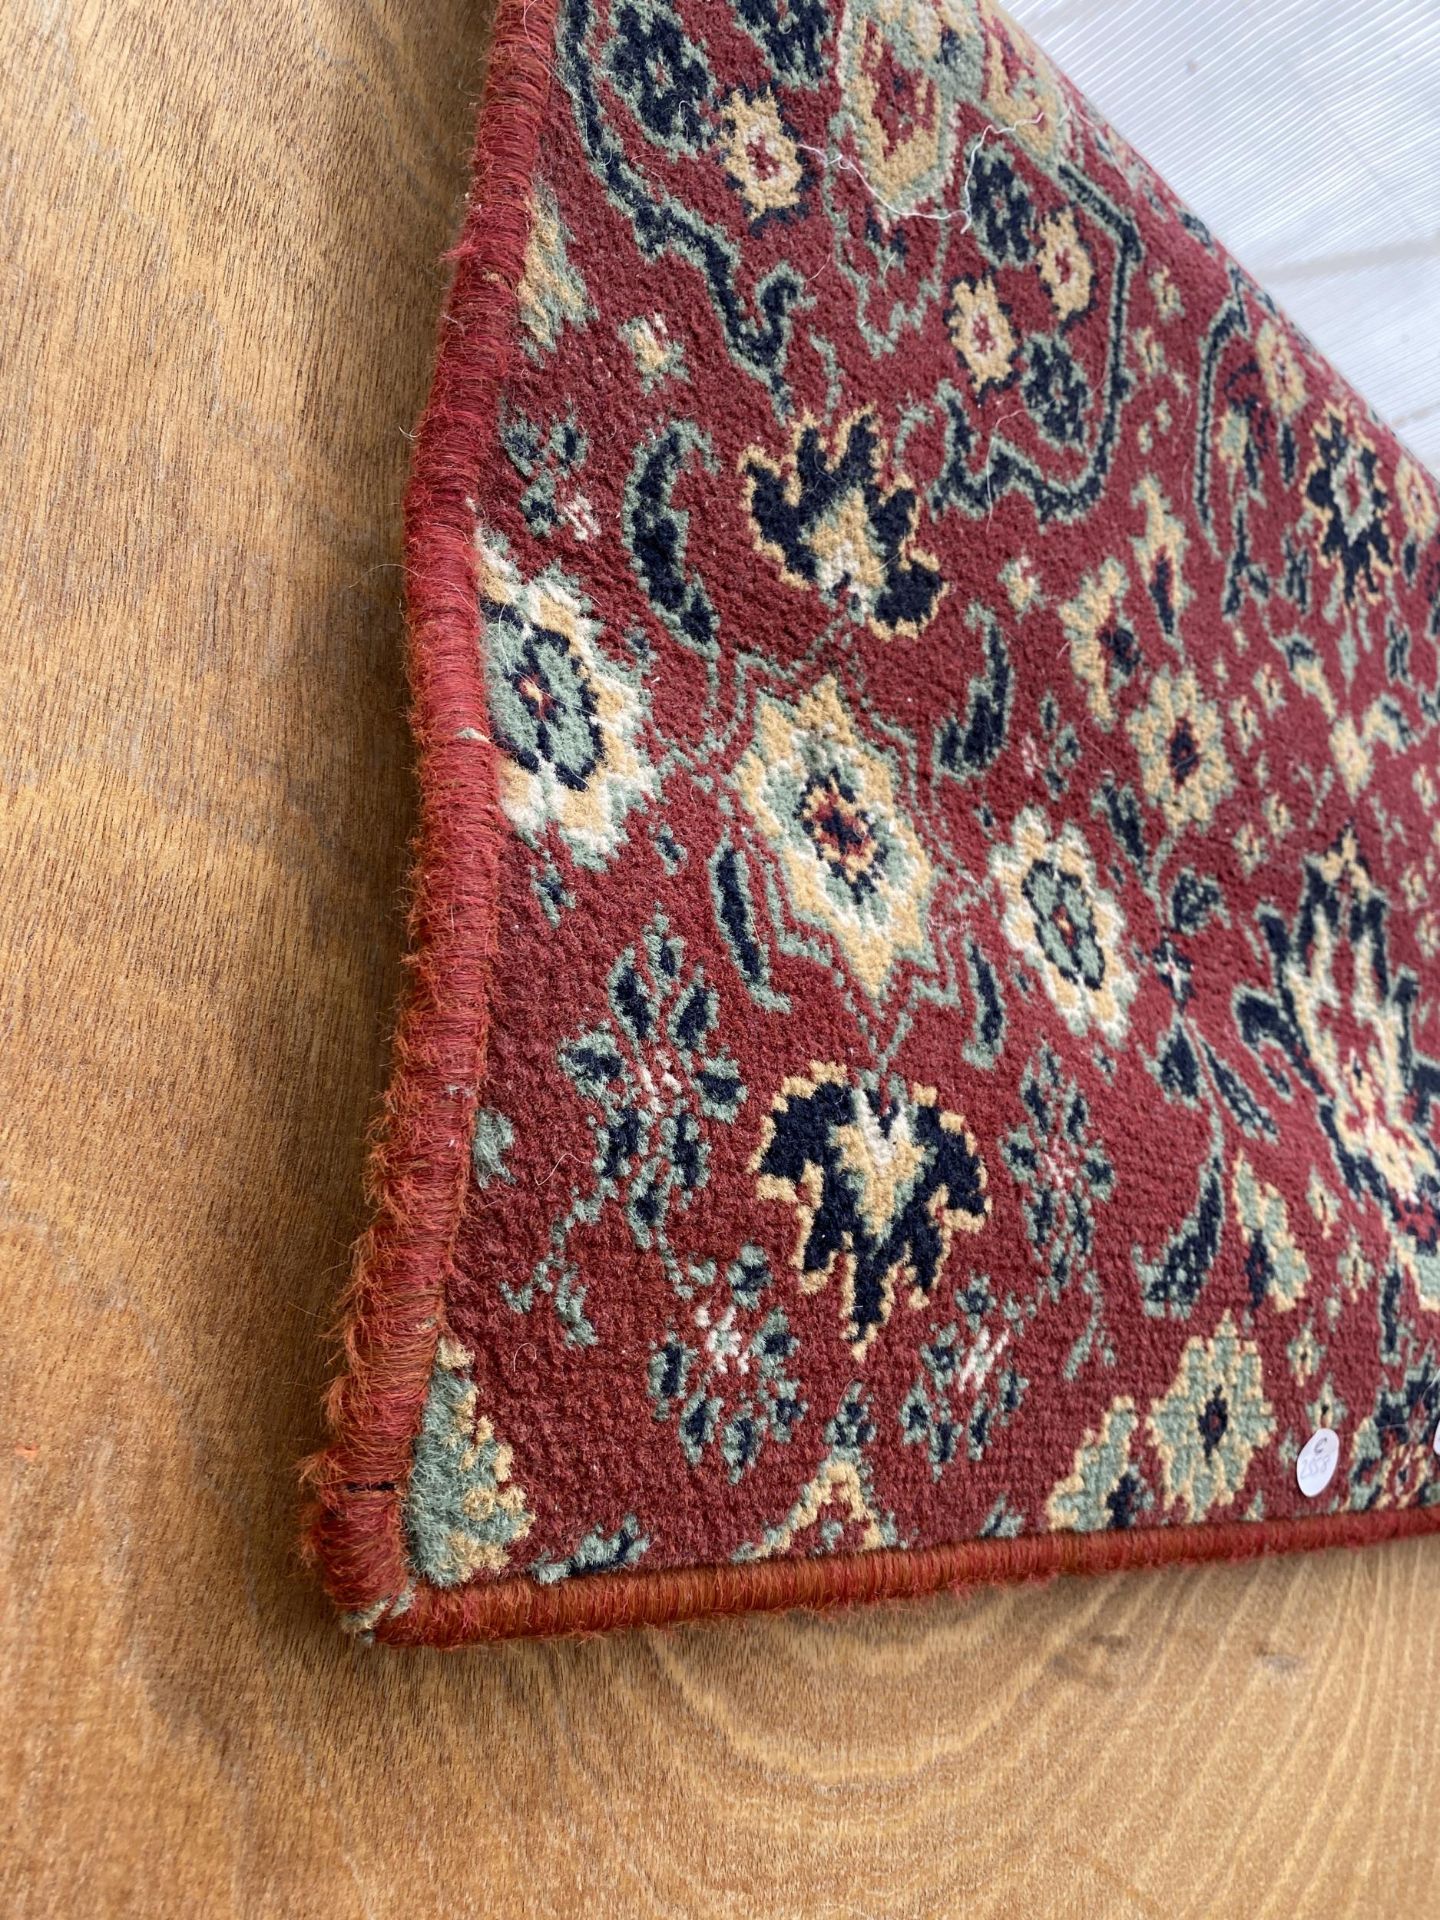 A SMALL RED PATTERNED RUG - Bild 2 aus 2